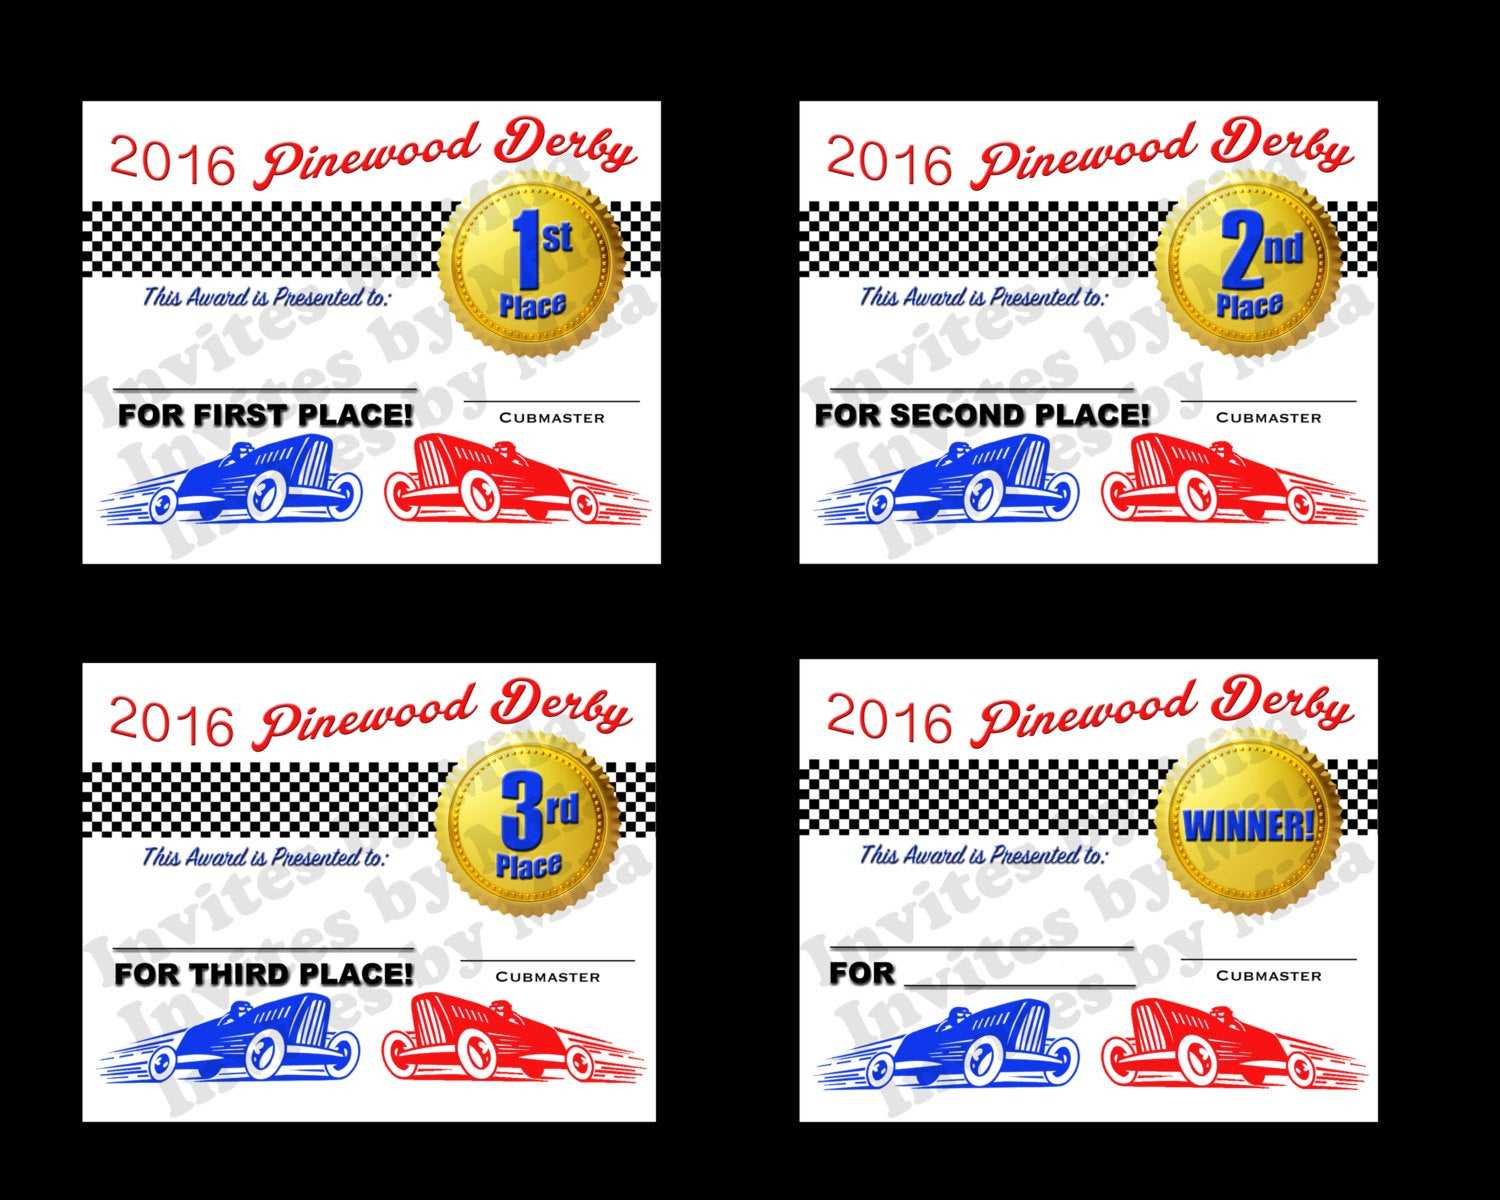 Pinewood Derby Certificate Template ] – Inspection Regarding Pinewood Derby Certificate Template